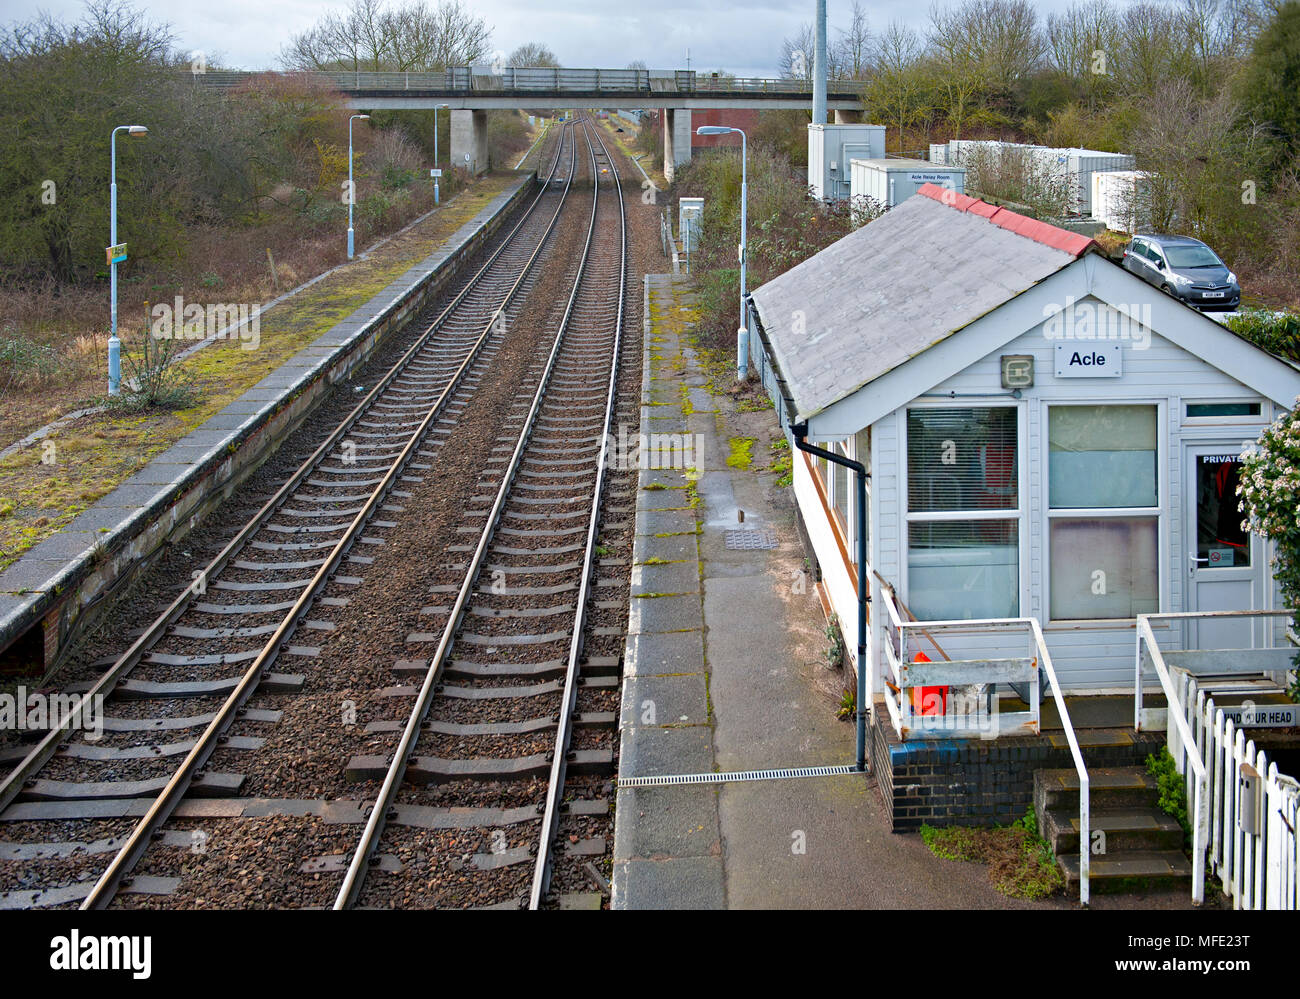 Acle railway station on the Wherry lines between Norwich and Great Yarmouth in Norfolk, UK Stock Photo